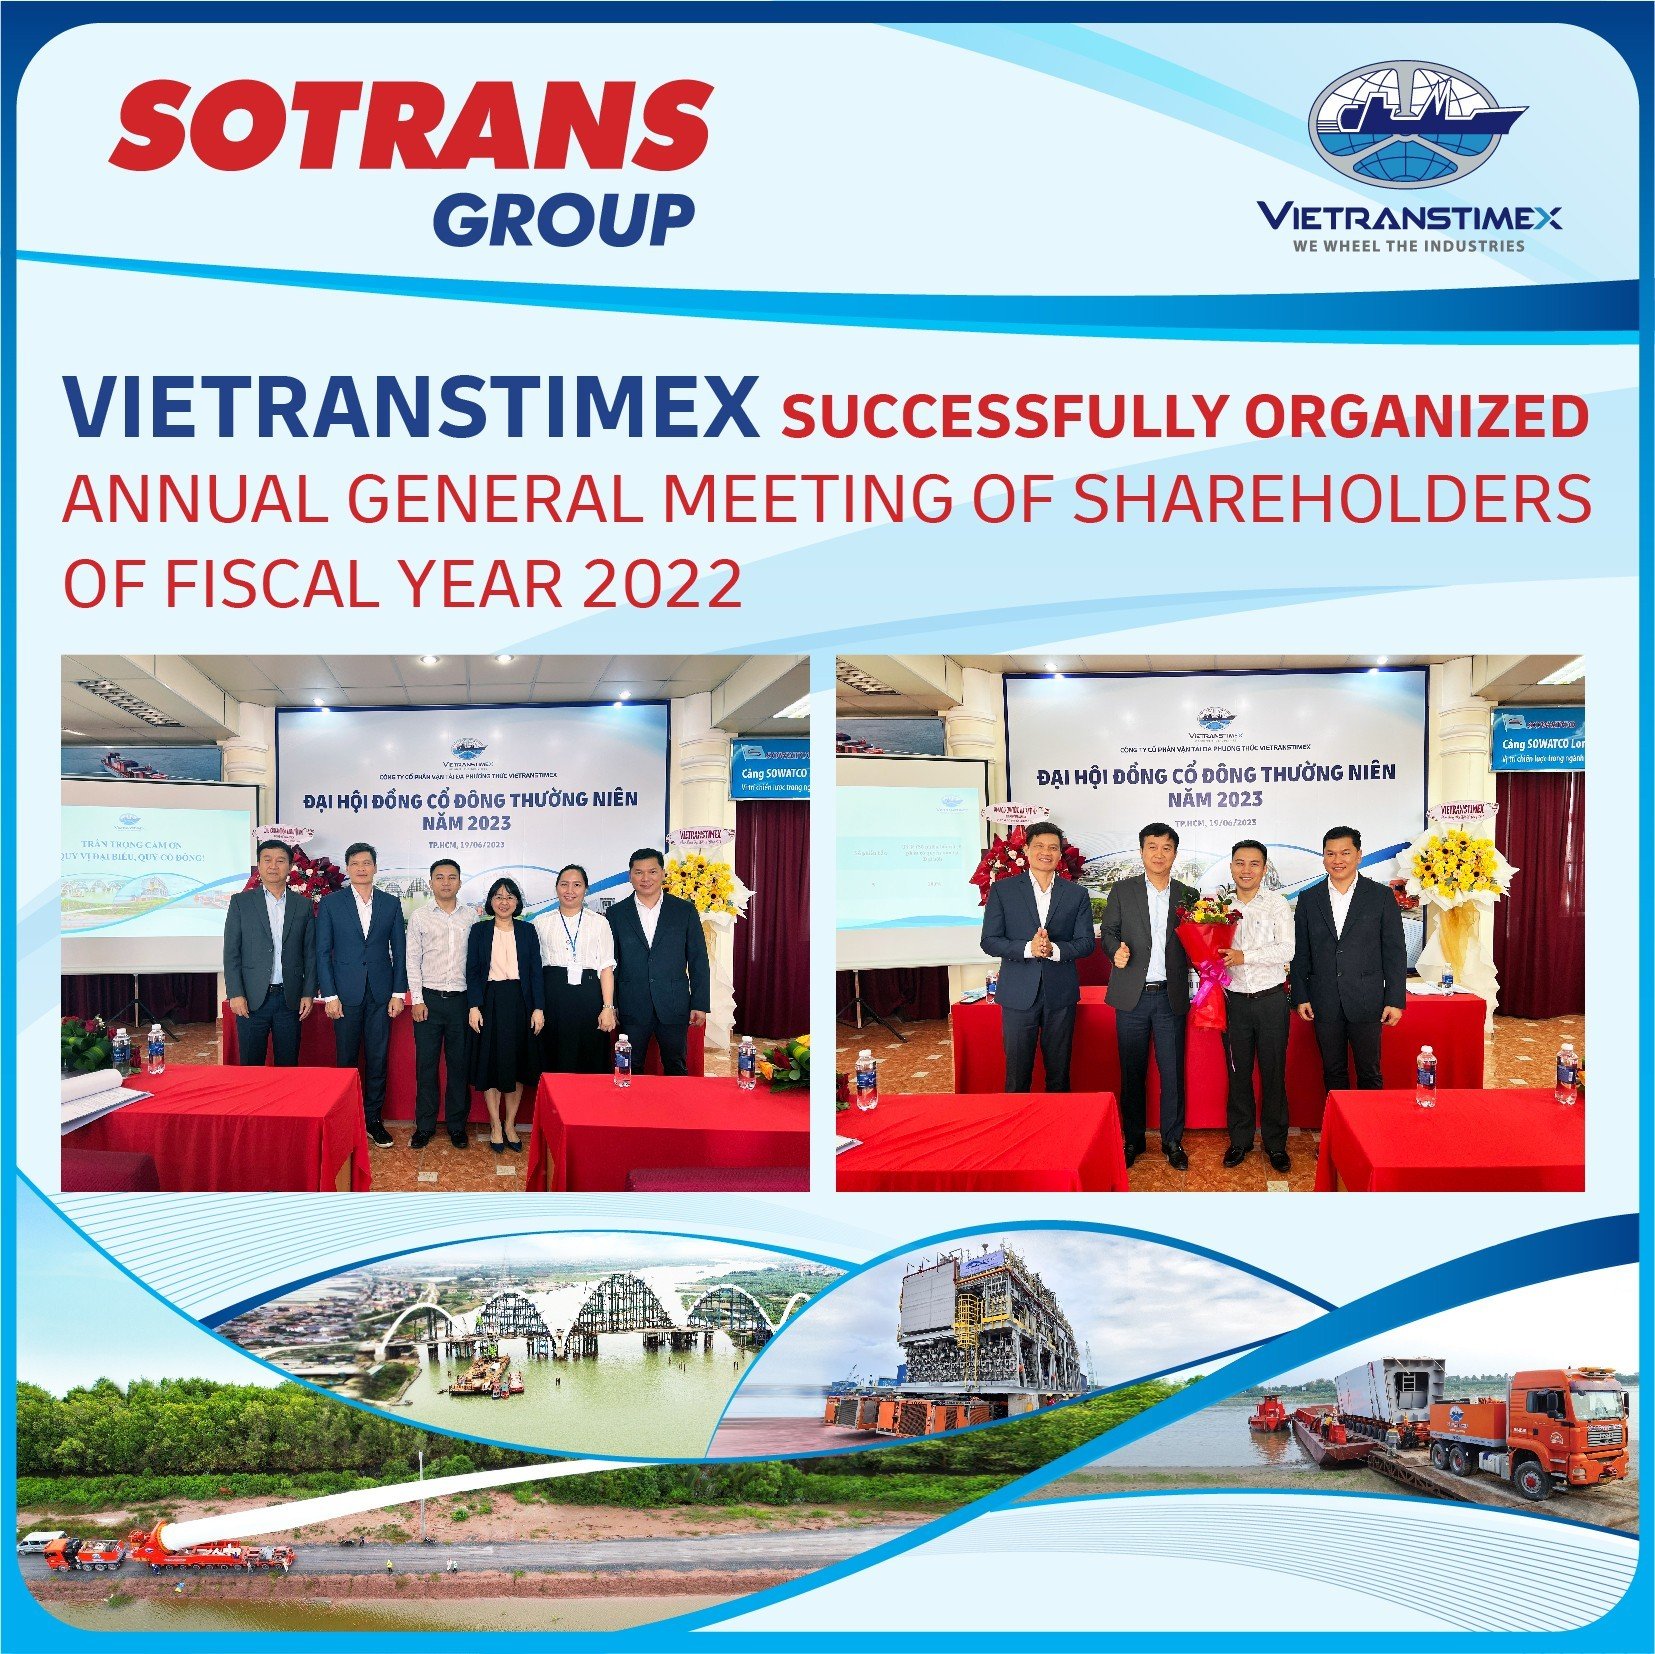 Vietranstimex Successfully Organized Annual General Meeting of Shareholders of Fiscal Year 2022